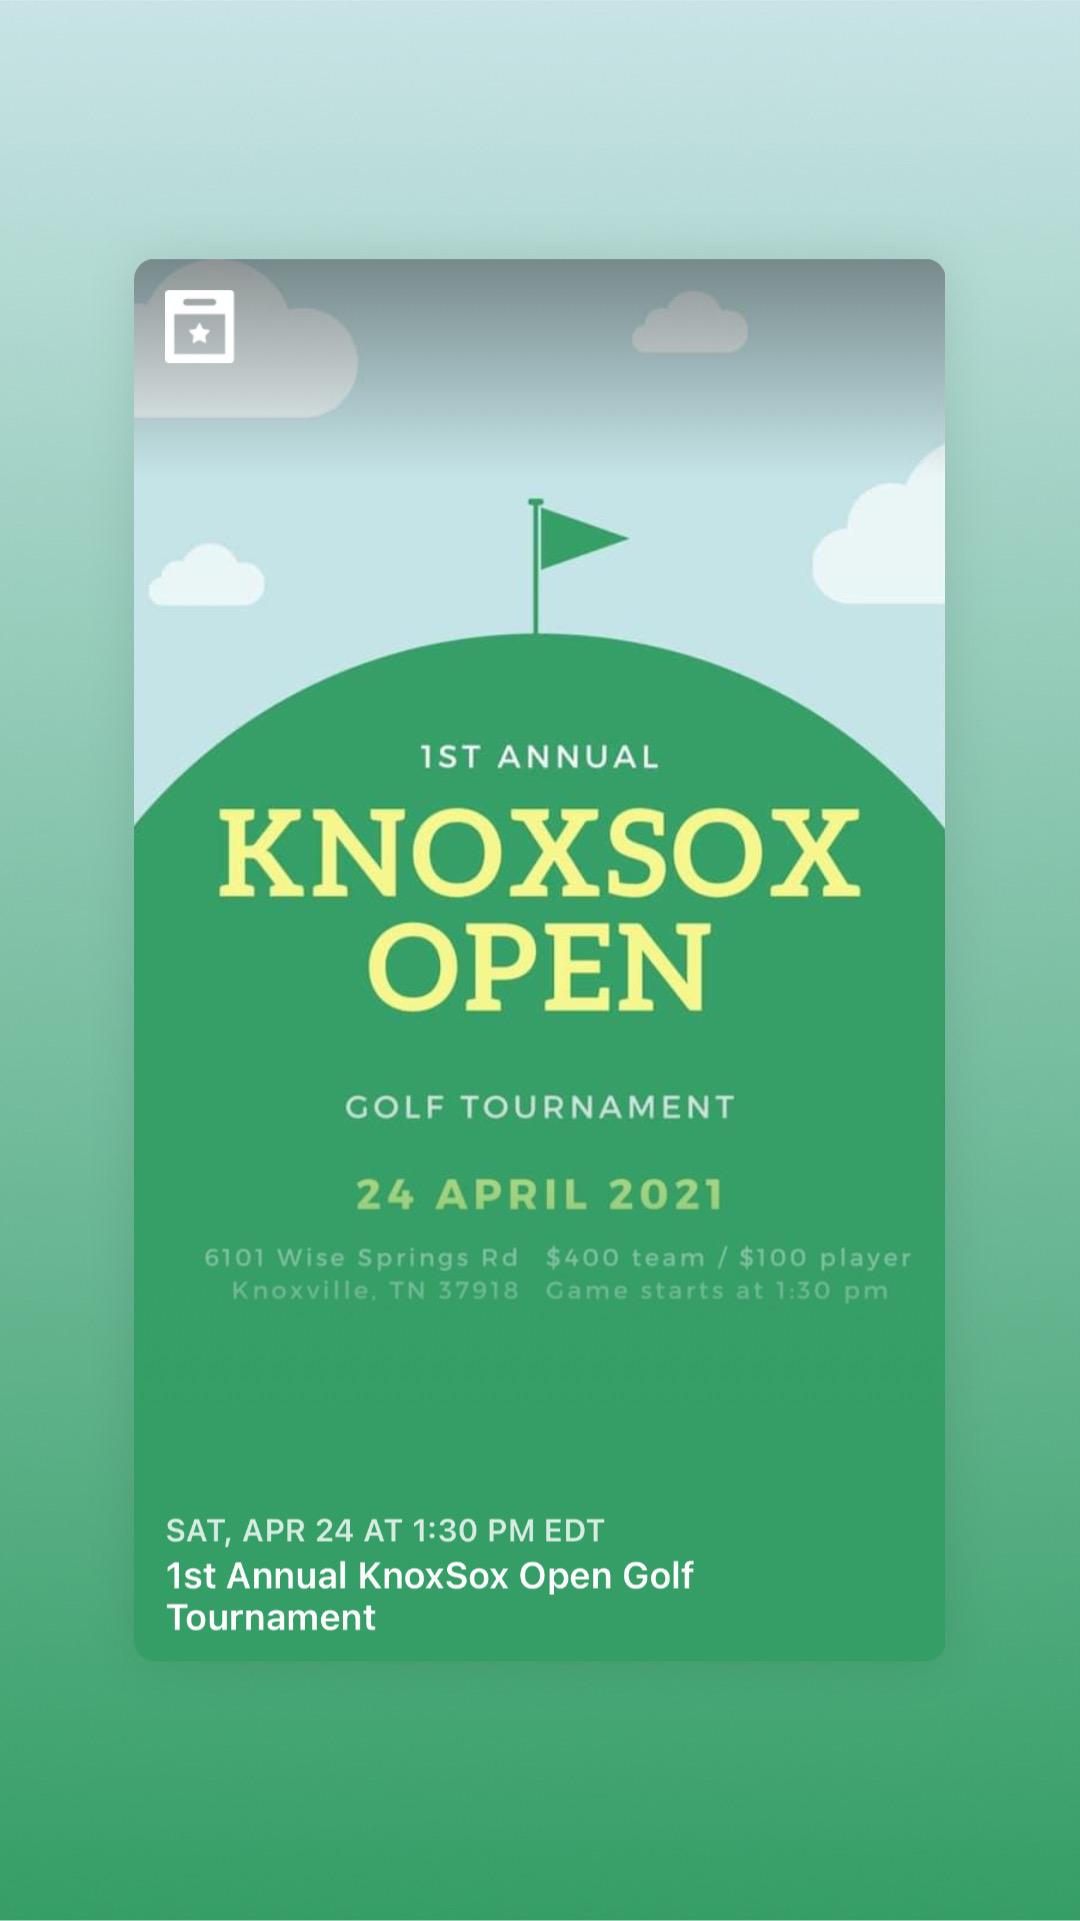 1st Annual KnoxSox Open Golf Tournament